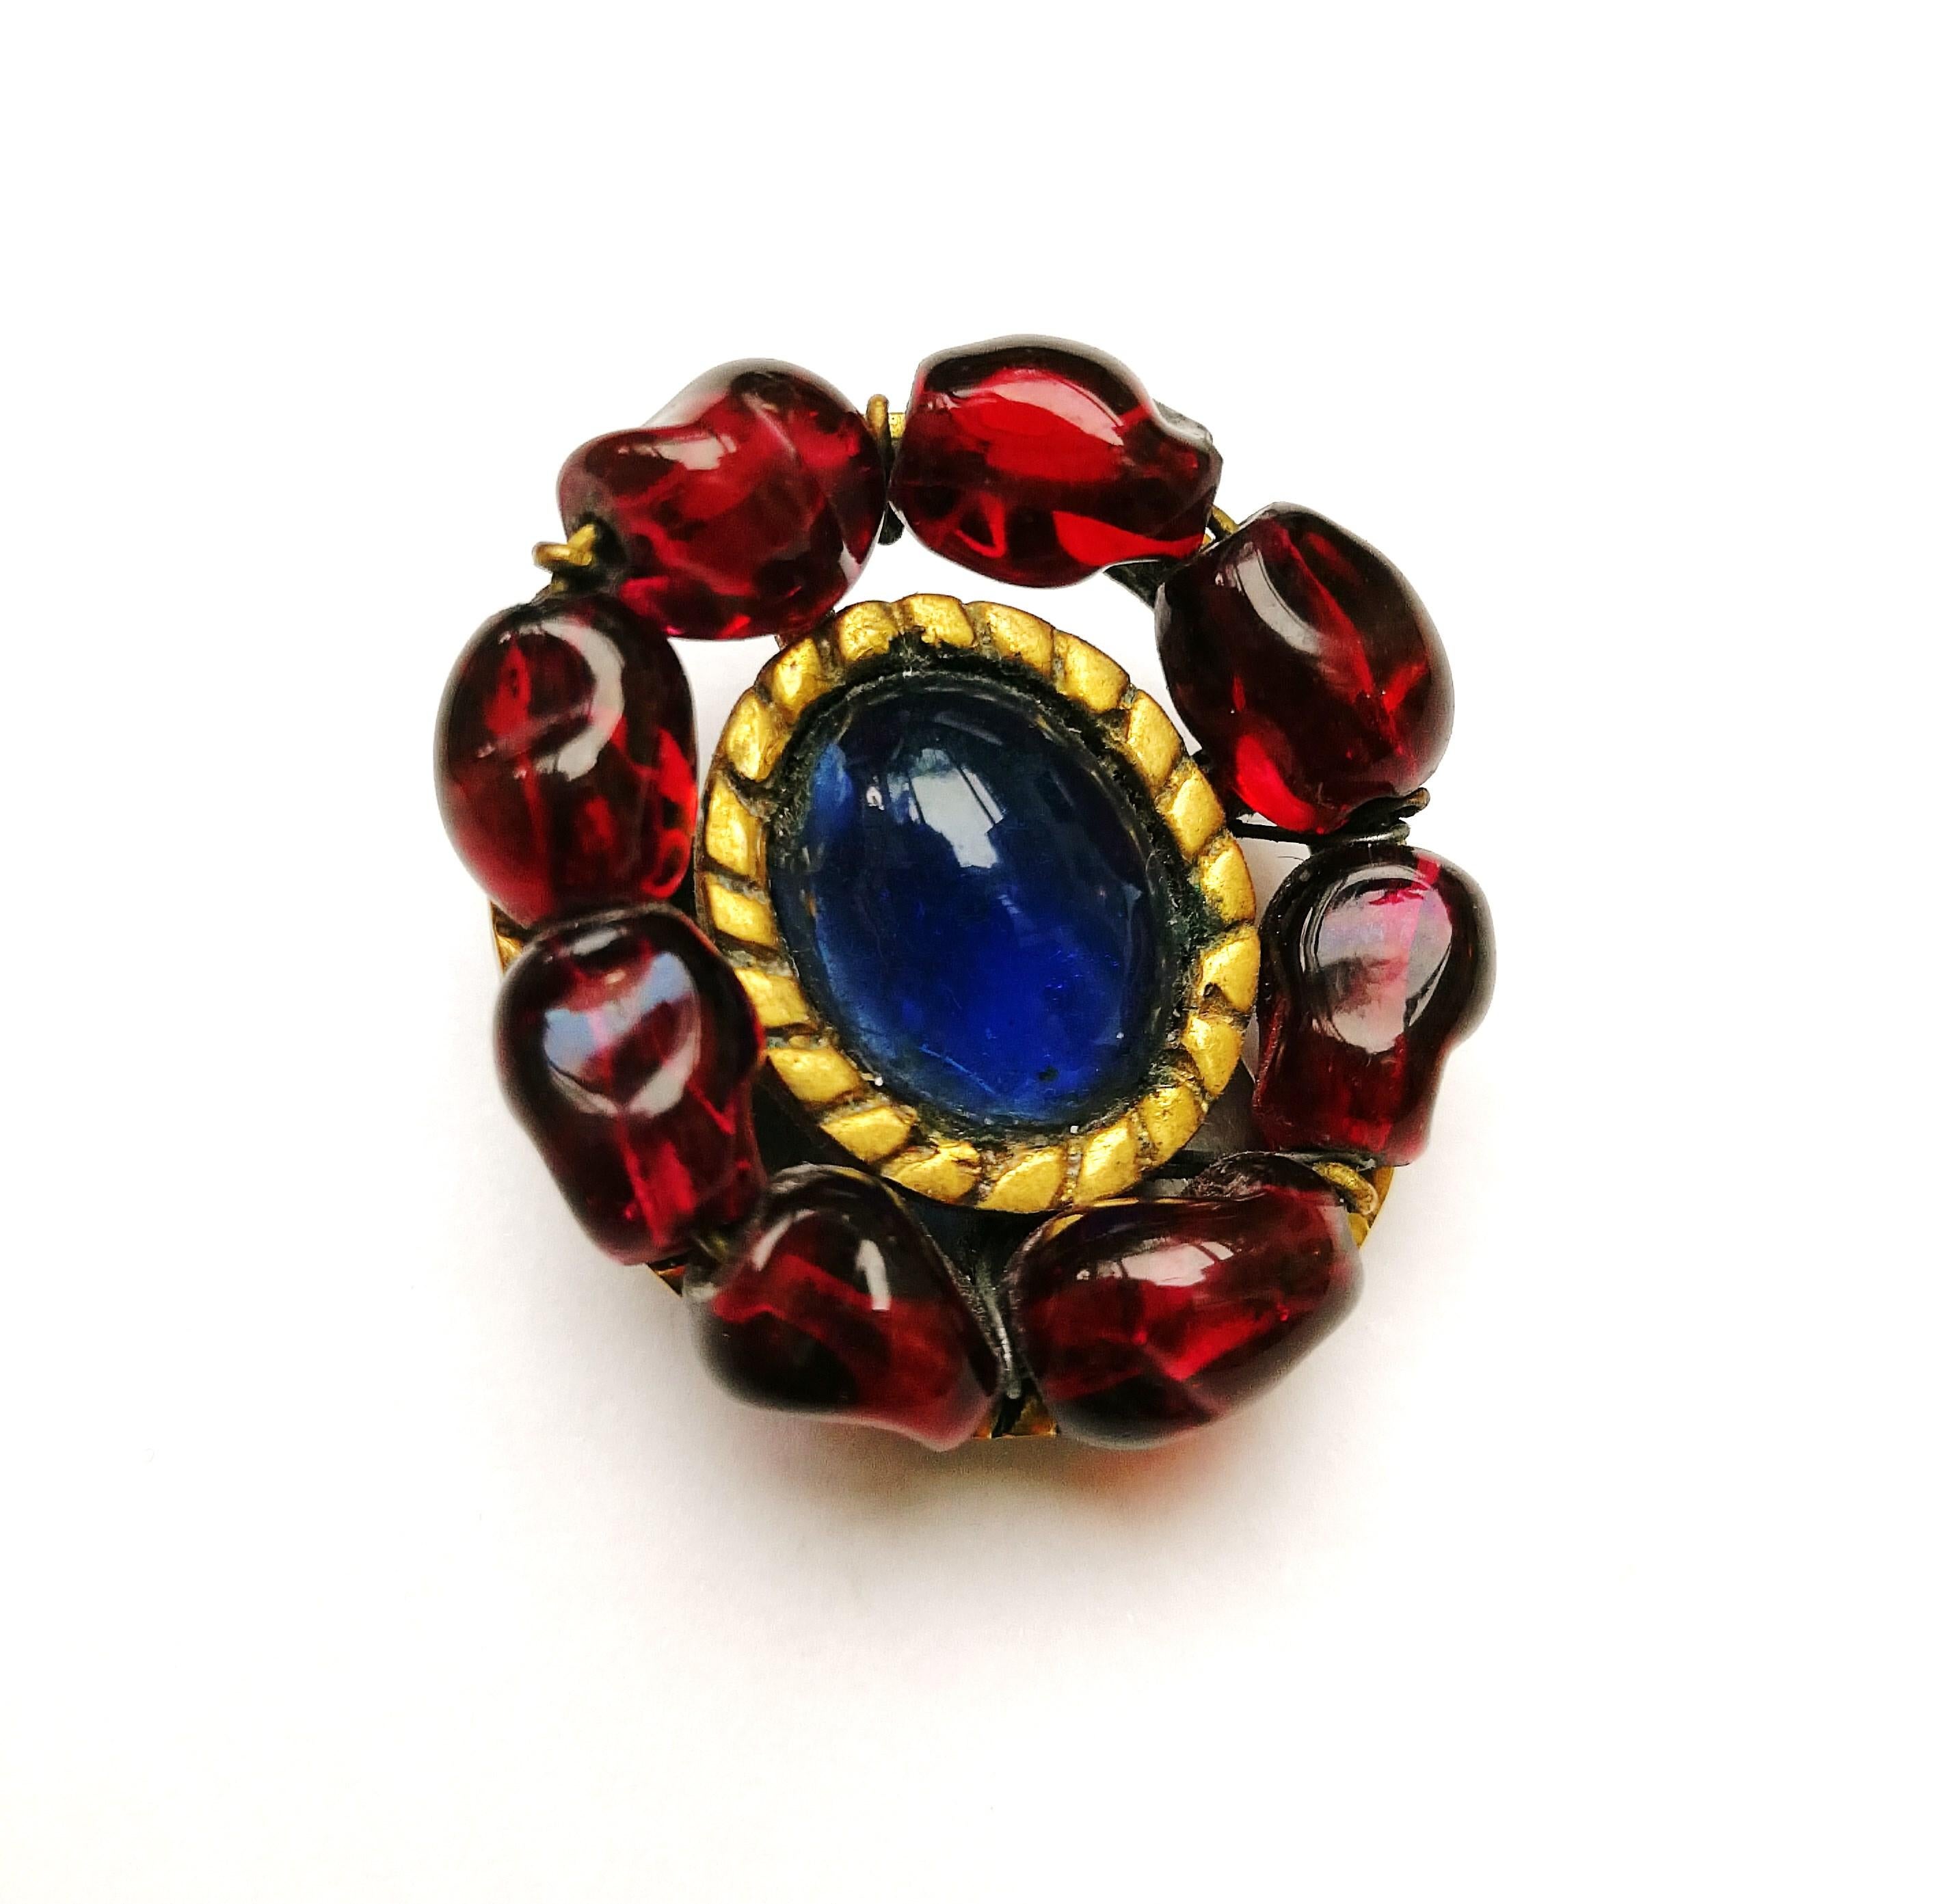 Ruby and sapphire poured glass earrings, att. Maison Gripoix for Chanel, 1930s. 2